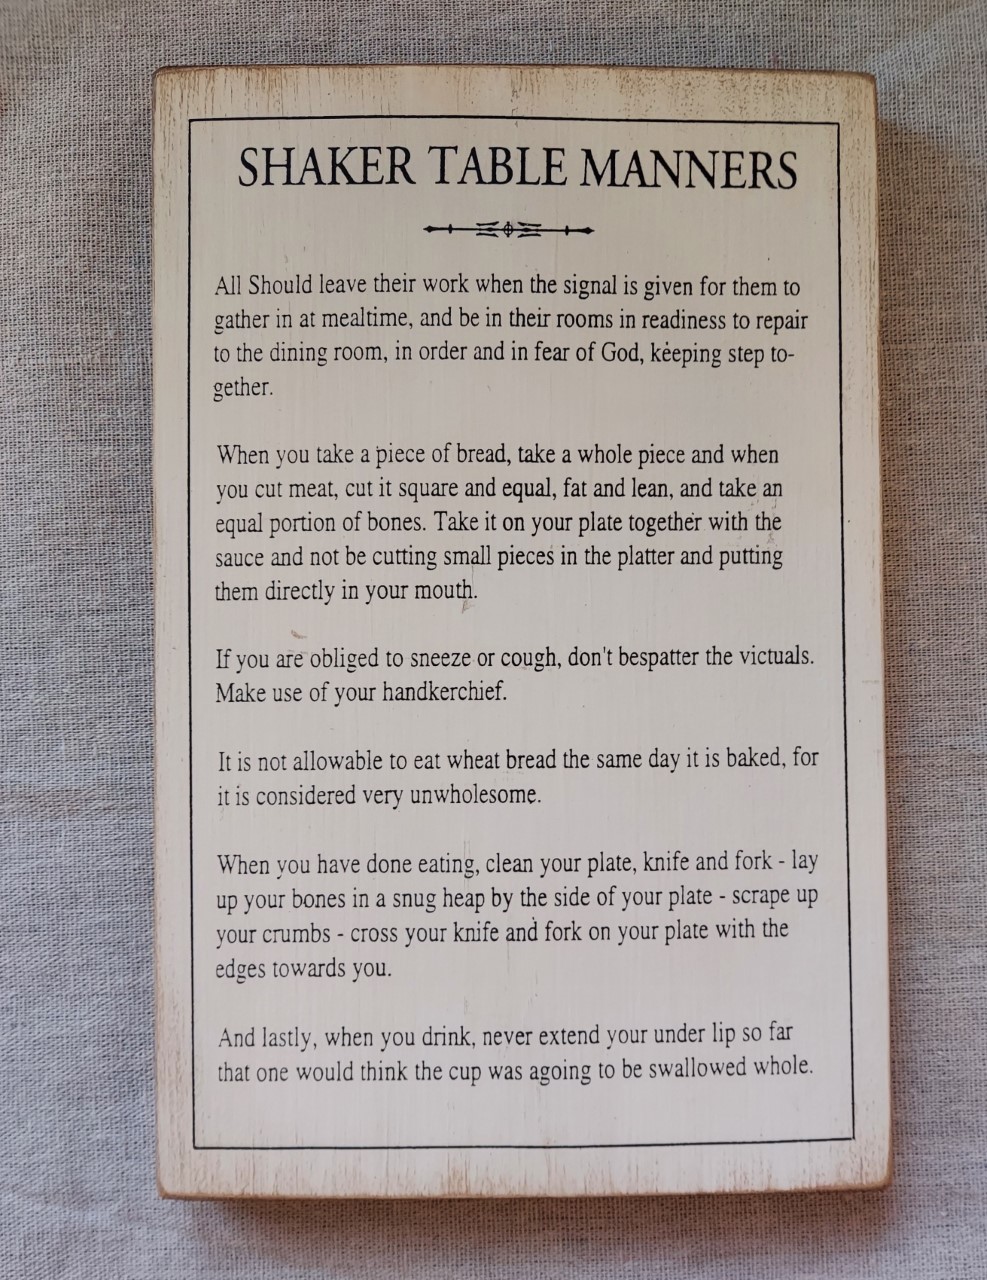 a list of table manners